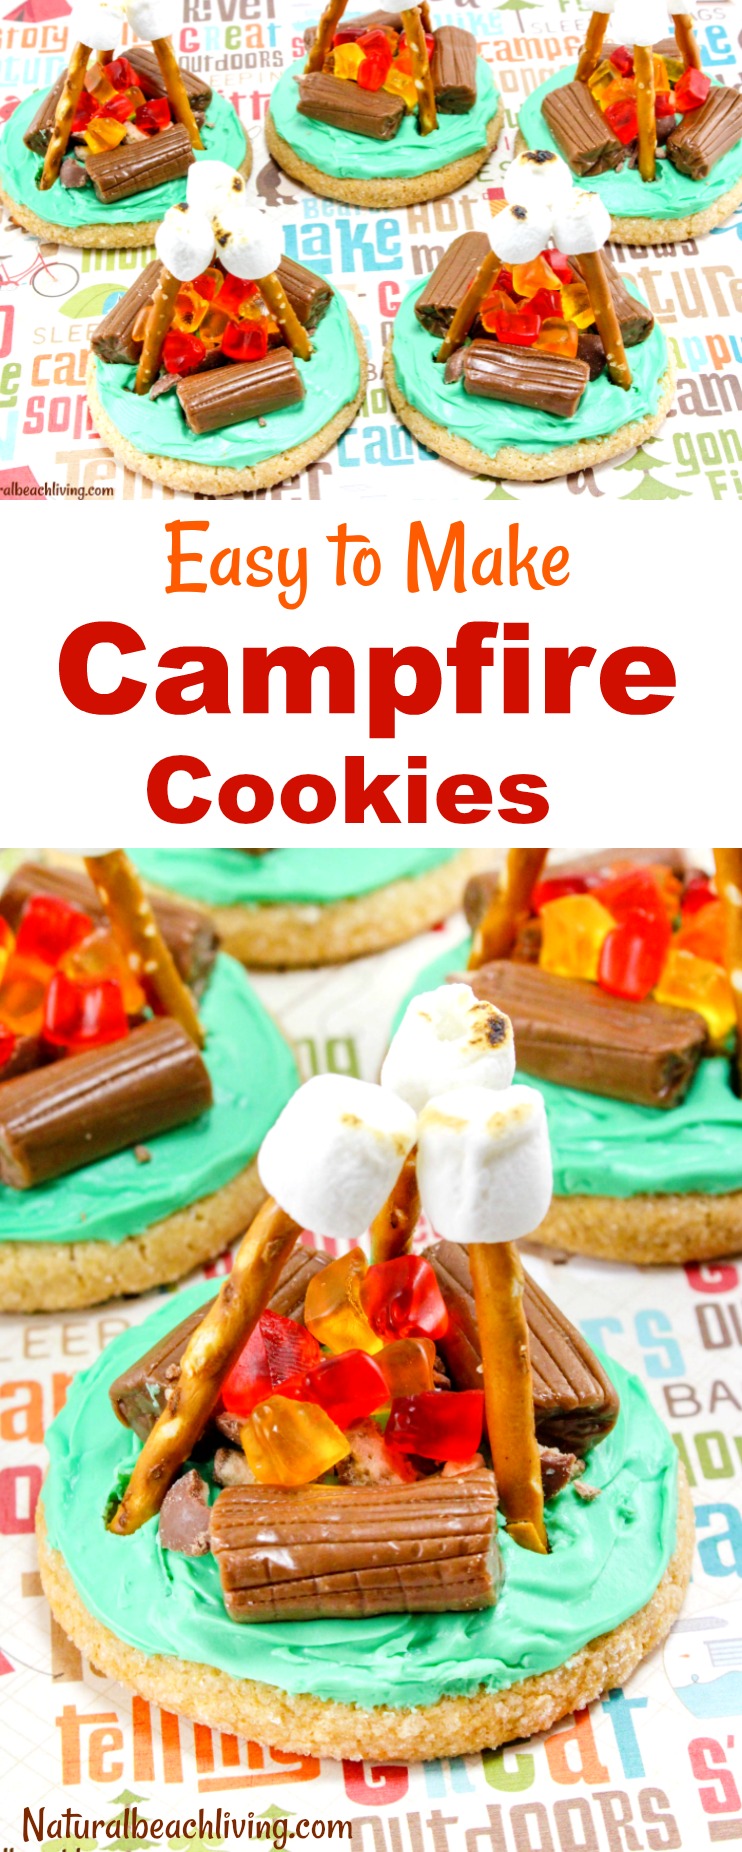 How to Make Campfire Cookies Everyone Will Love, Camping Theme, Camping Party Ideas, Camping food, Party food, Cookies, Easy Sugar Cookie Ideas, Kids Snacks